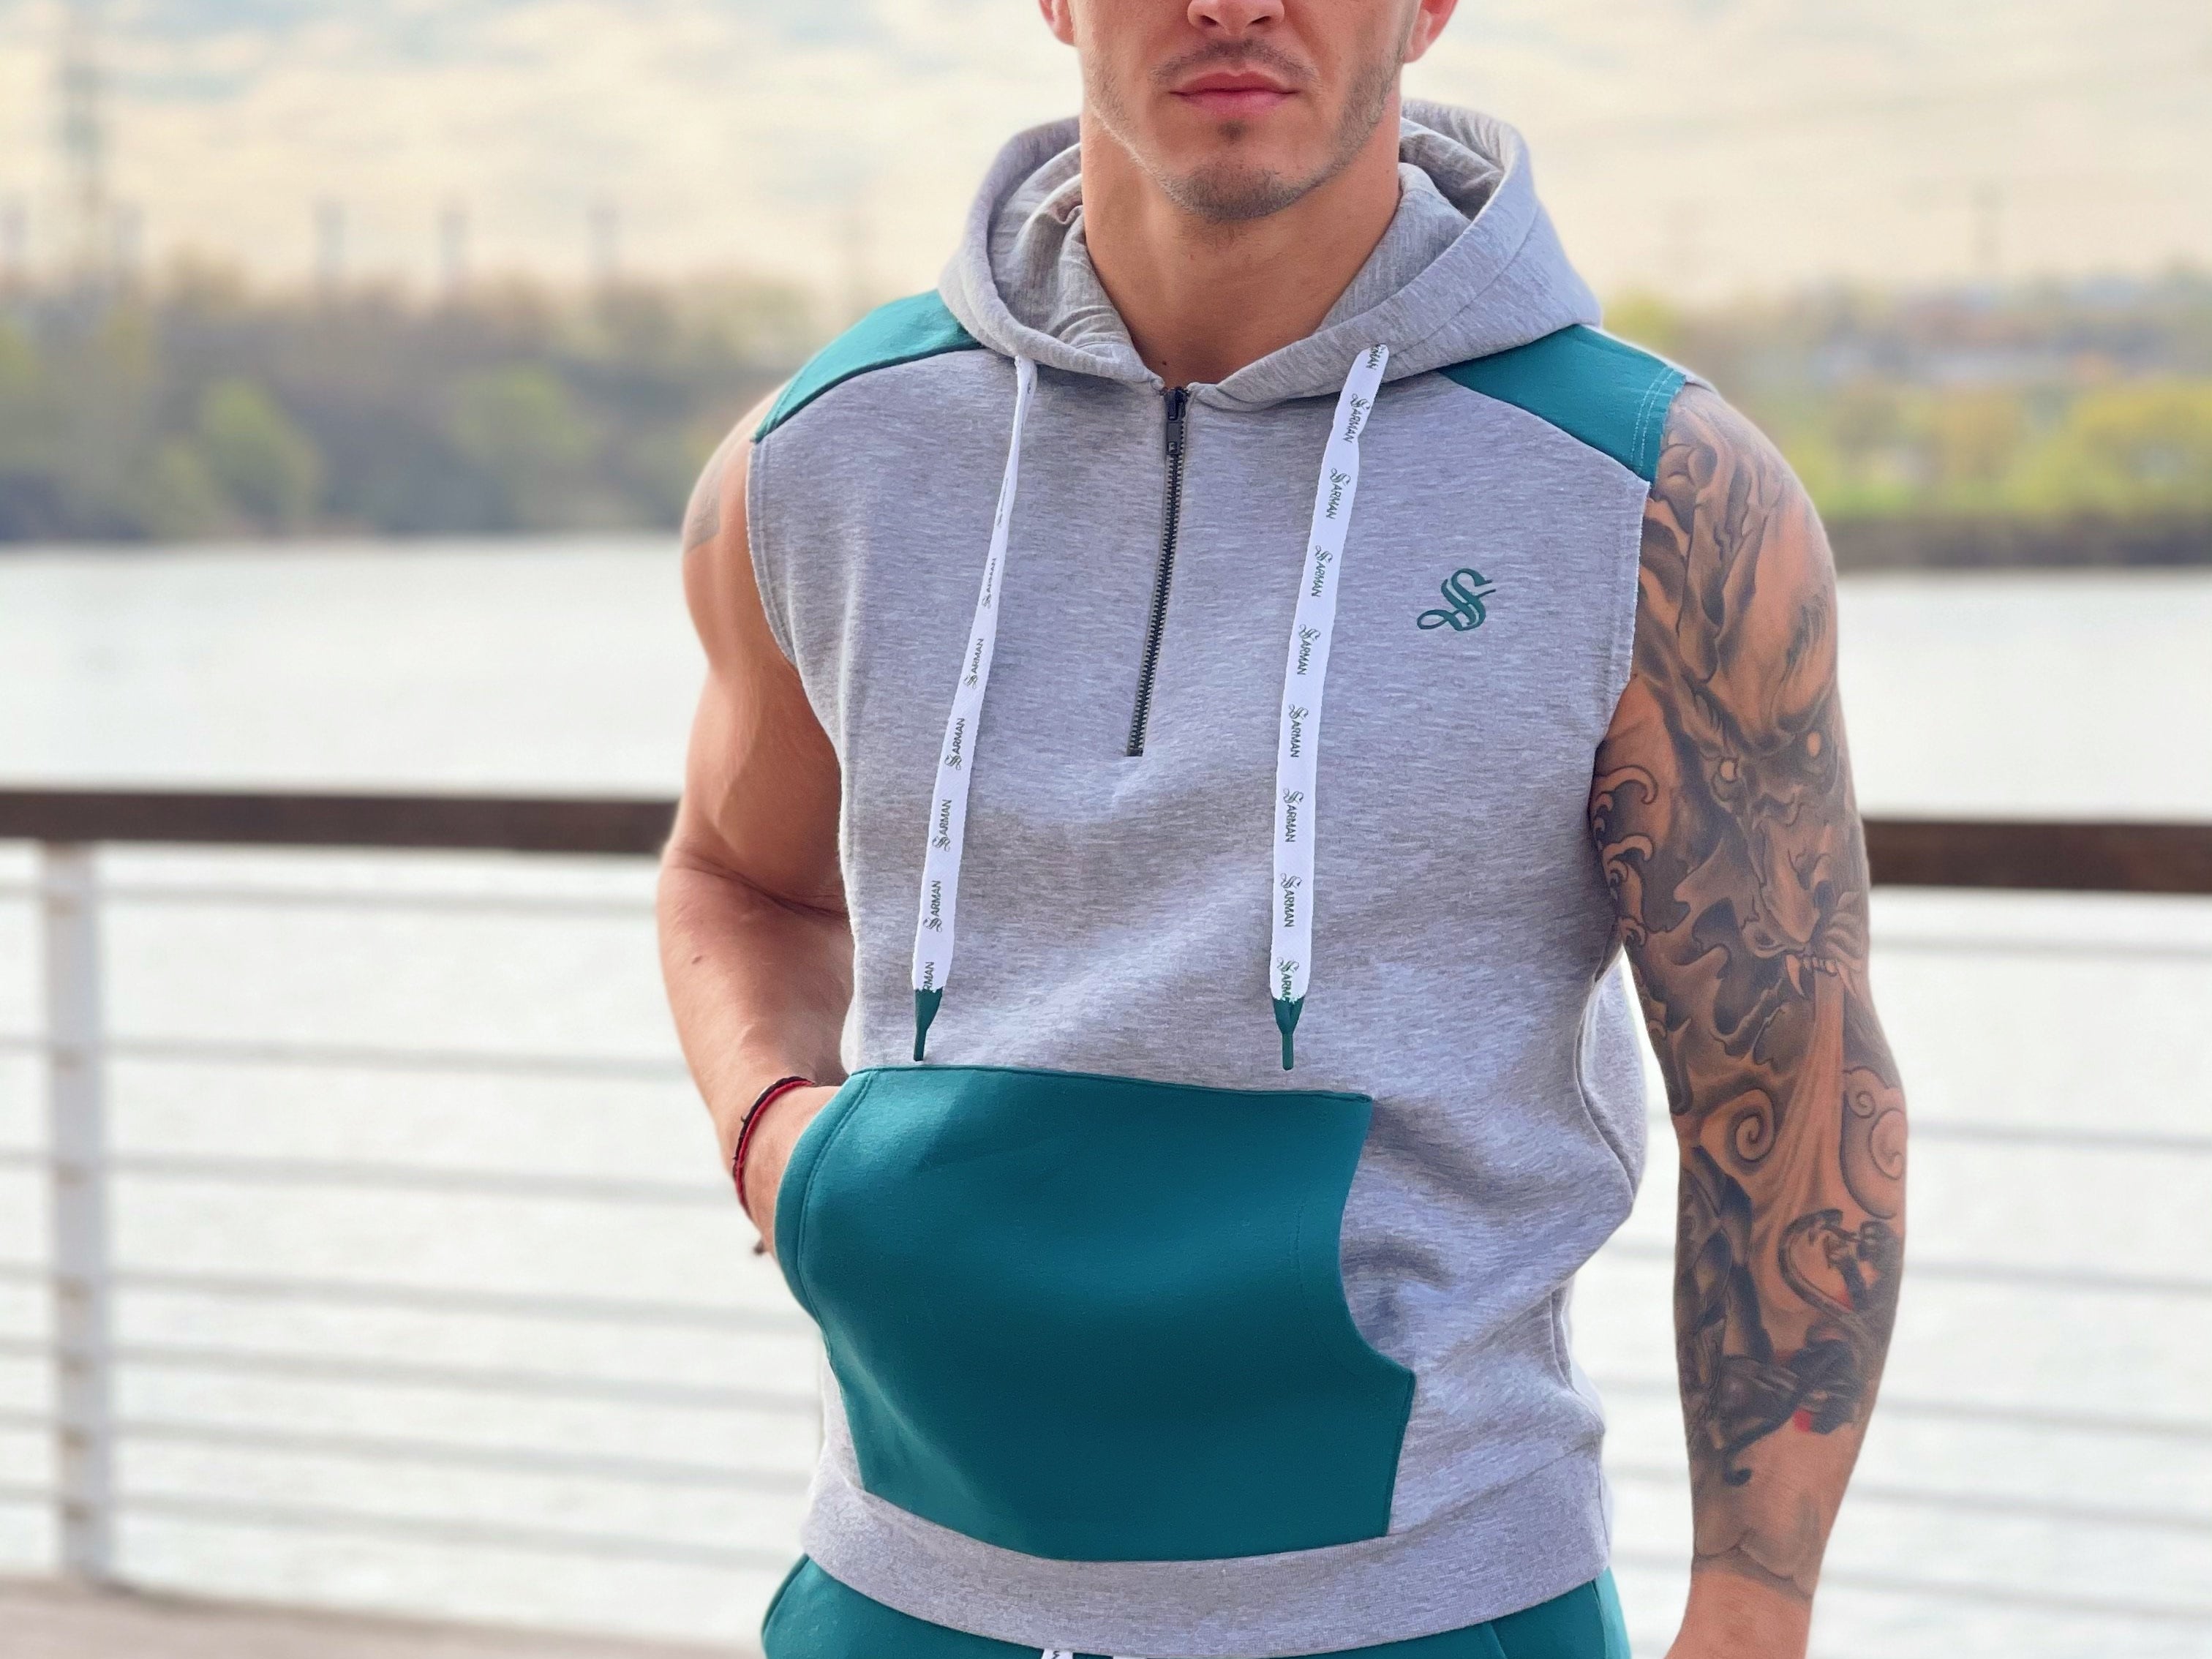 Rostan - Grey/Green Sleeveless Hoodie for Men - Sarman Fashion - Wholesale Clothing Fashion Brand for Men from Canada